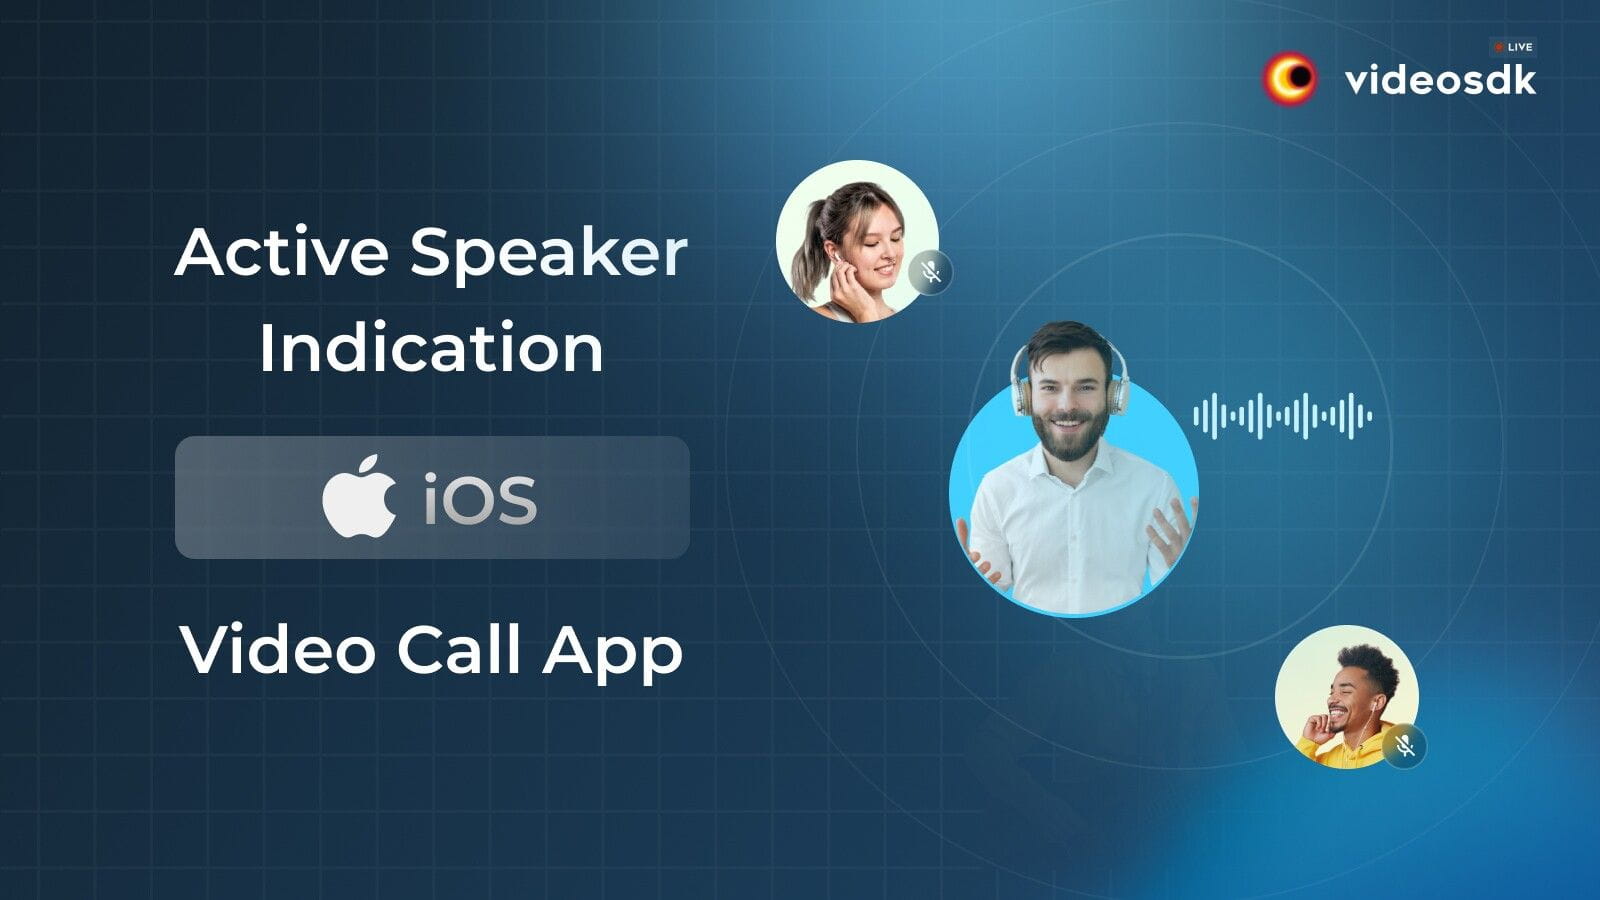 How to Integrate Active Speaker Indication in JavaScript Video Chat App?